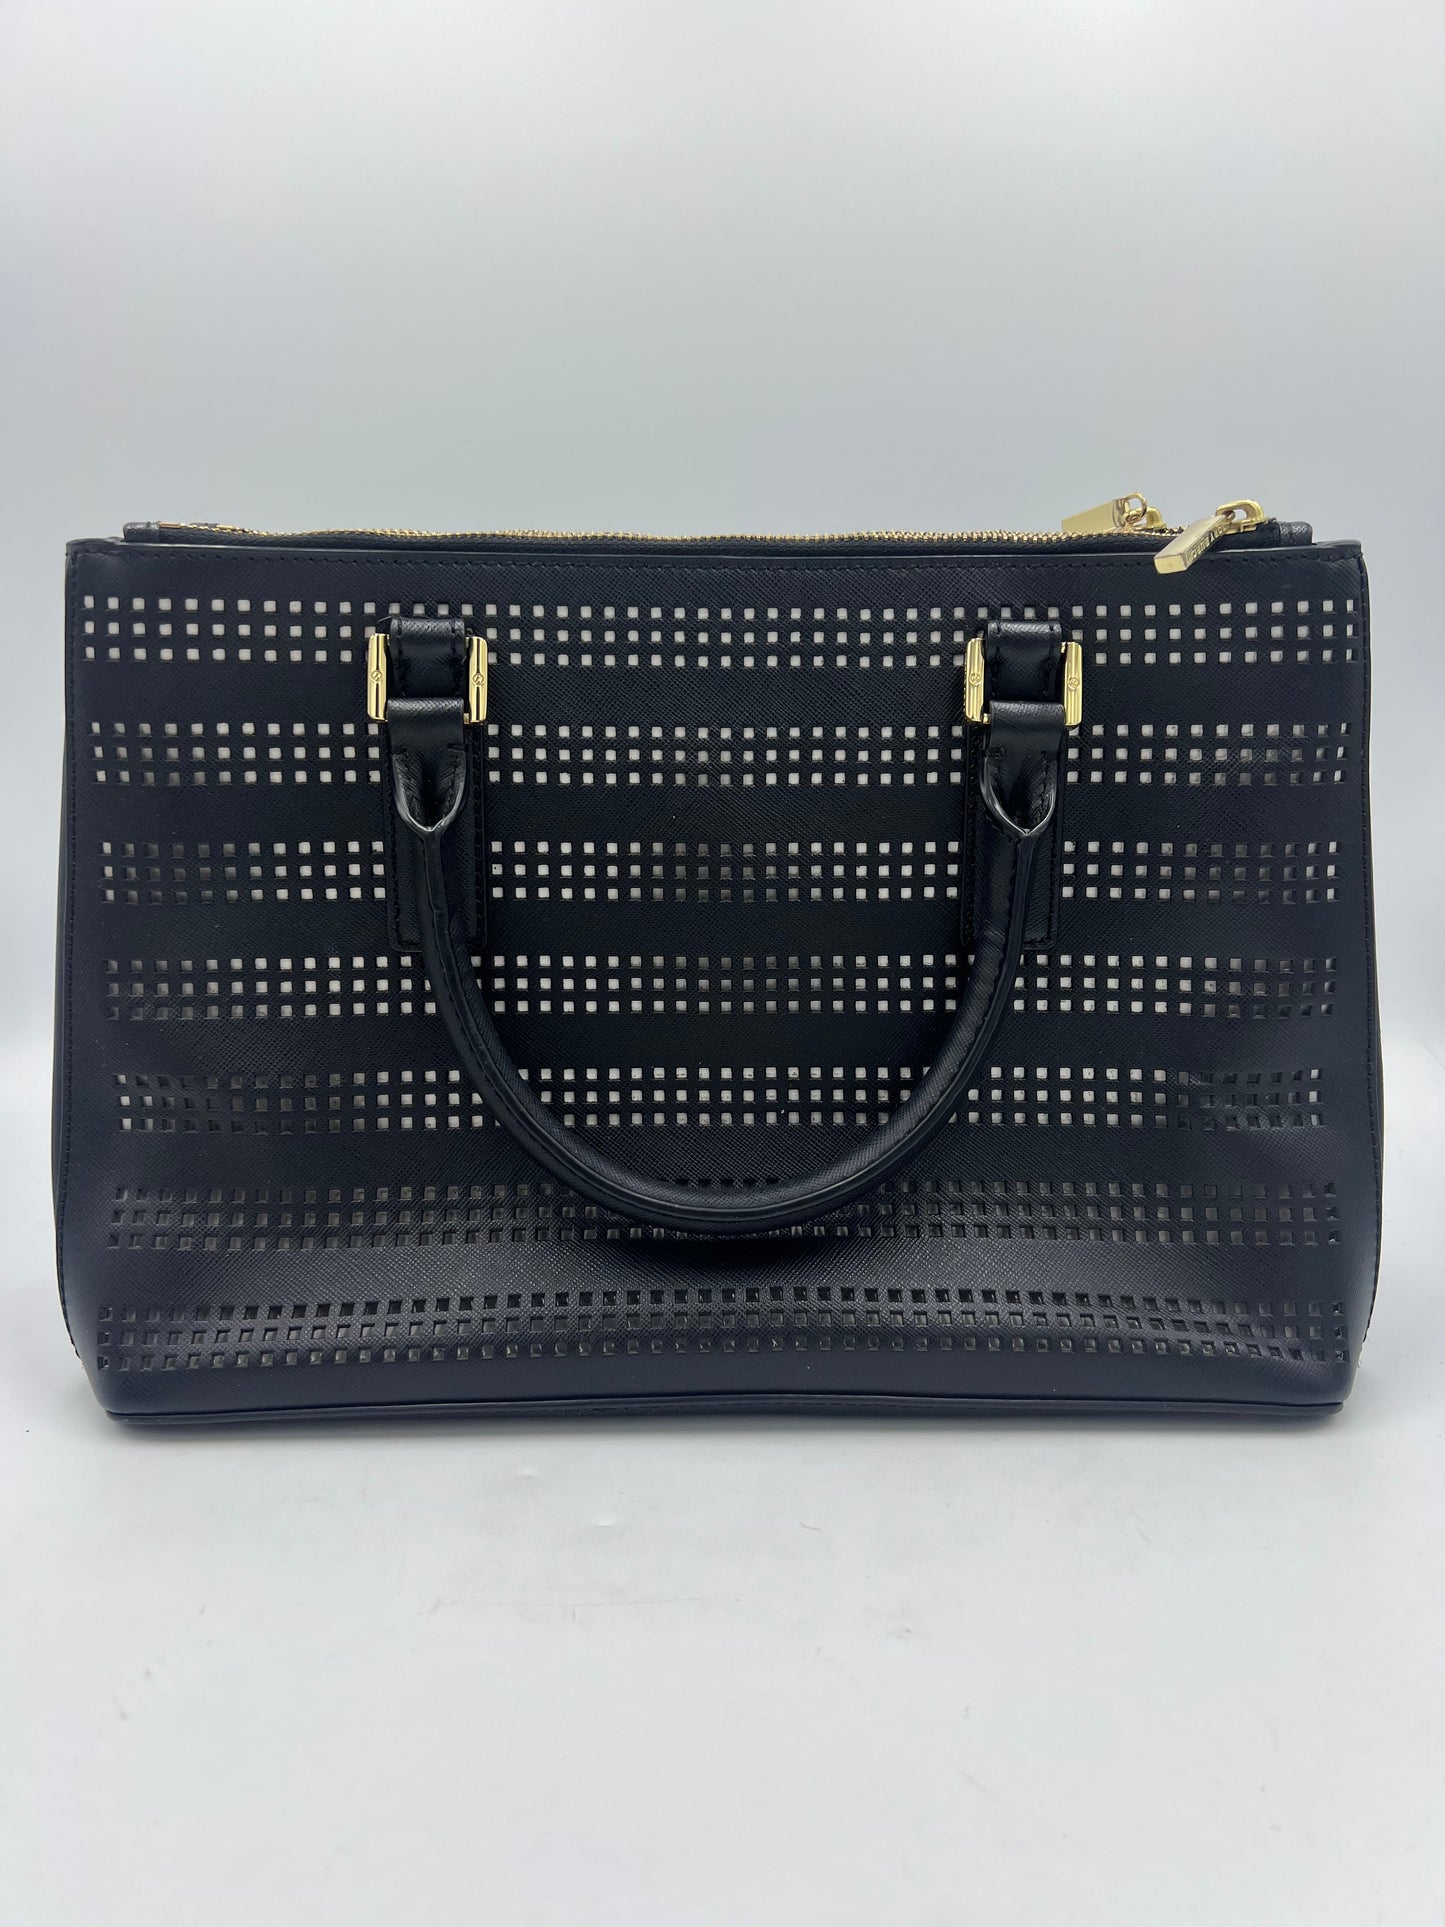 Tory Burch Robinson Perforated Tote